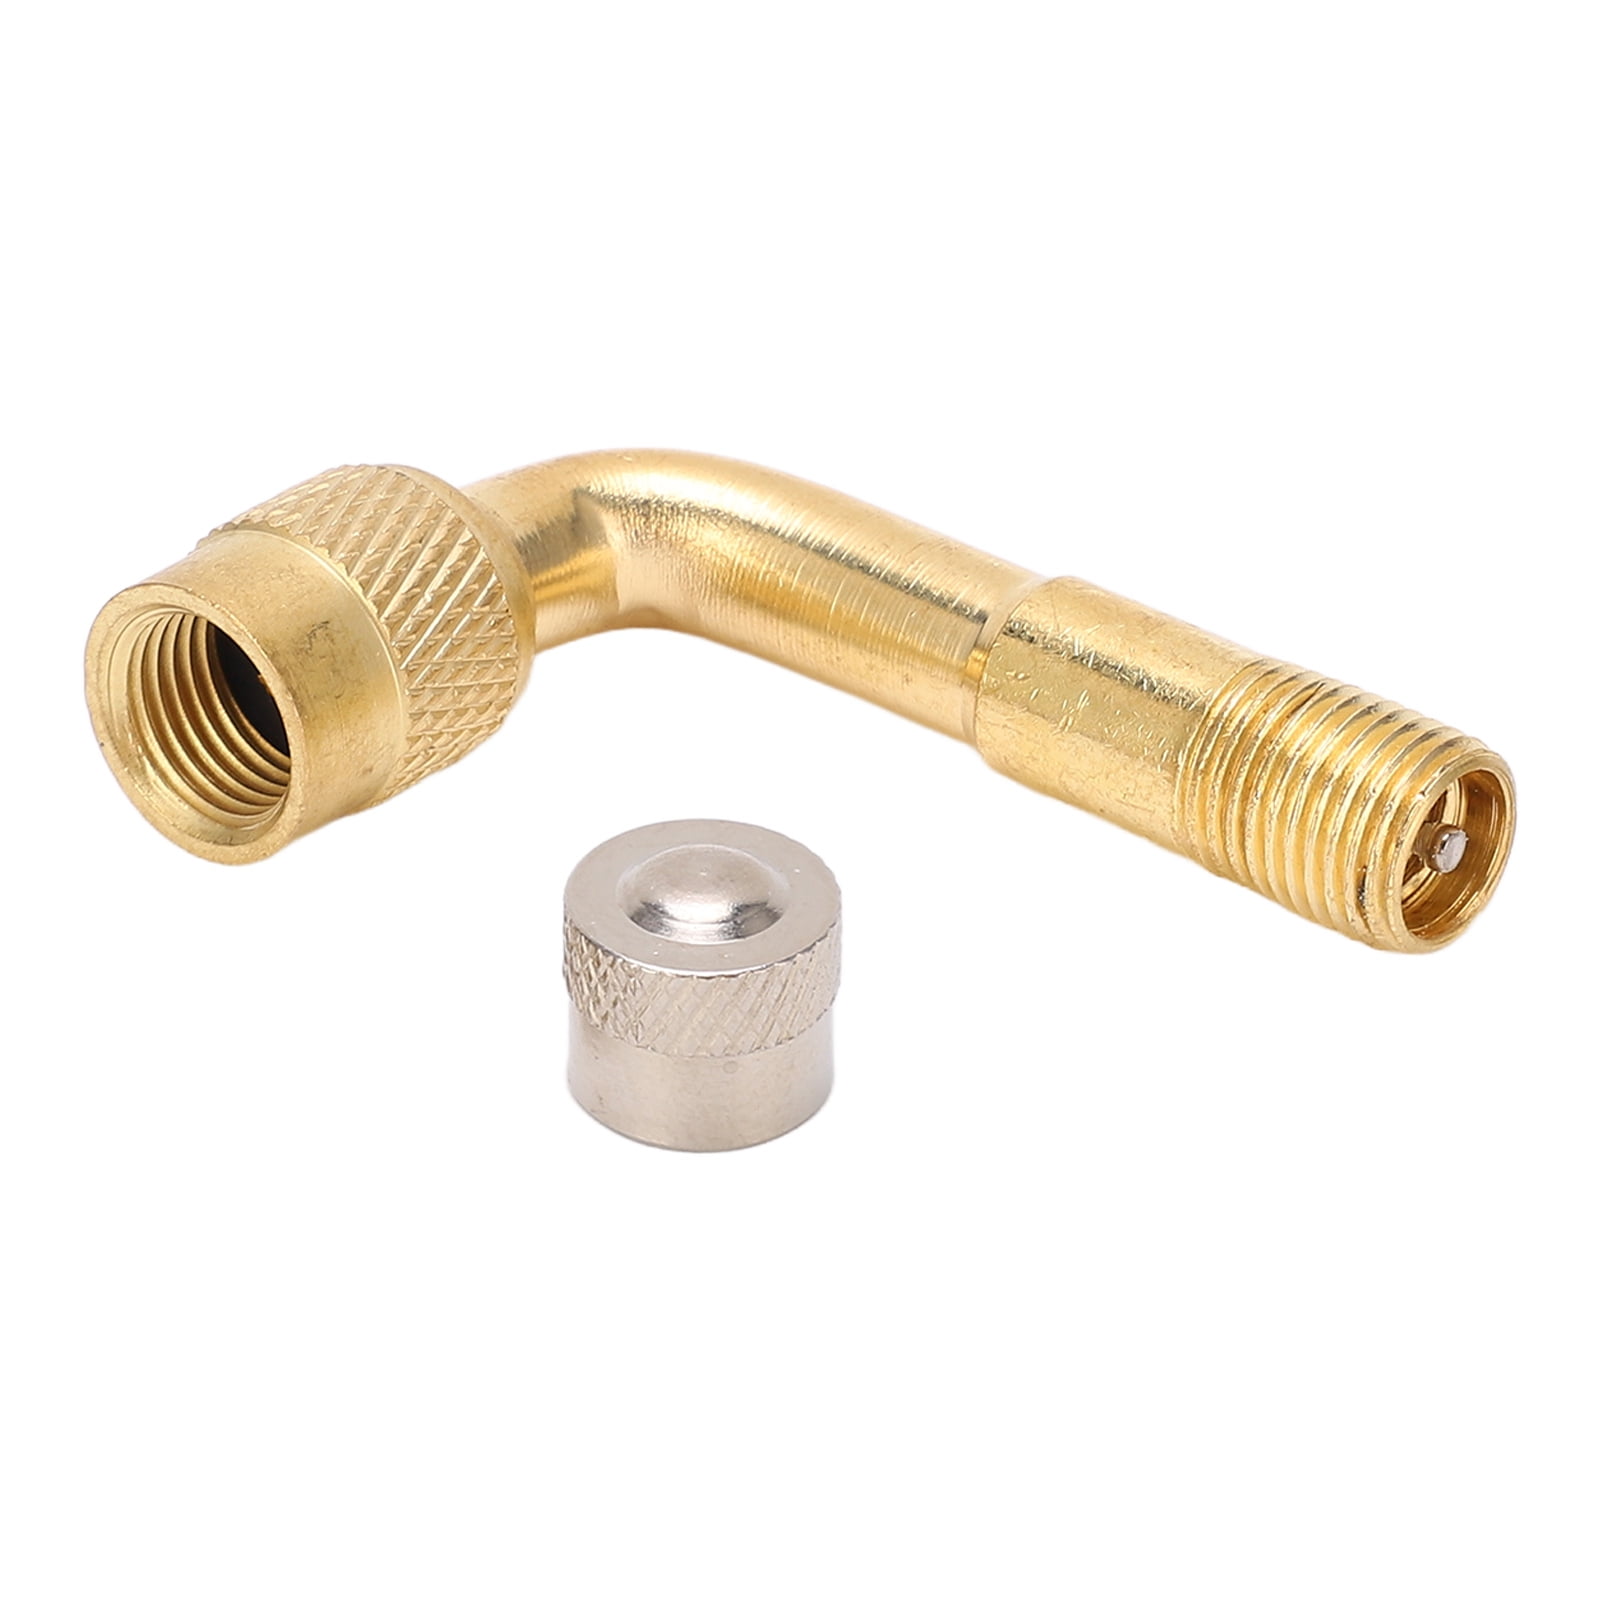 90 Degree Angle Brass Air Type Valve Extension Adaptor For Motorcycle Car Scoote 